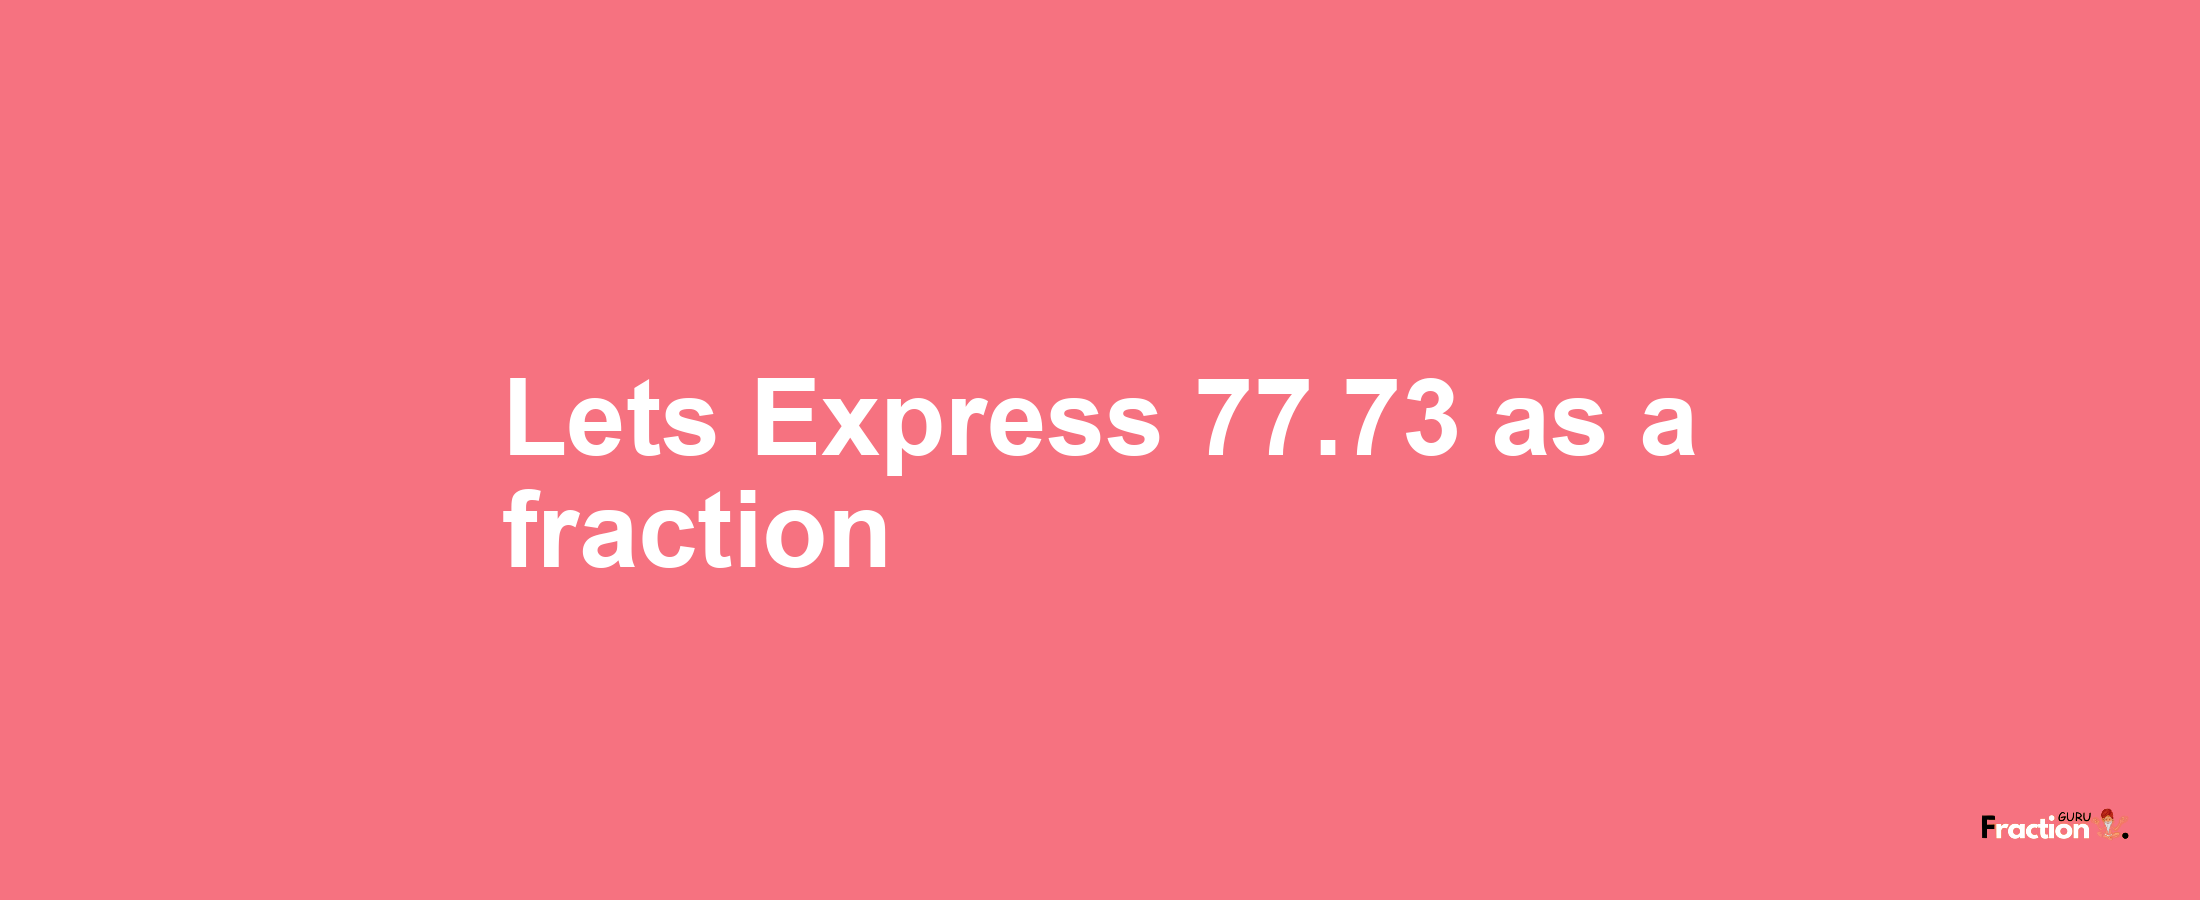 Lets Express 77.73 as afraction